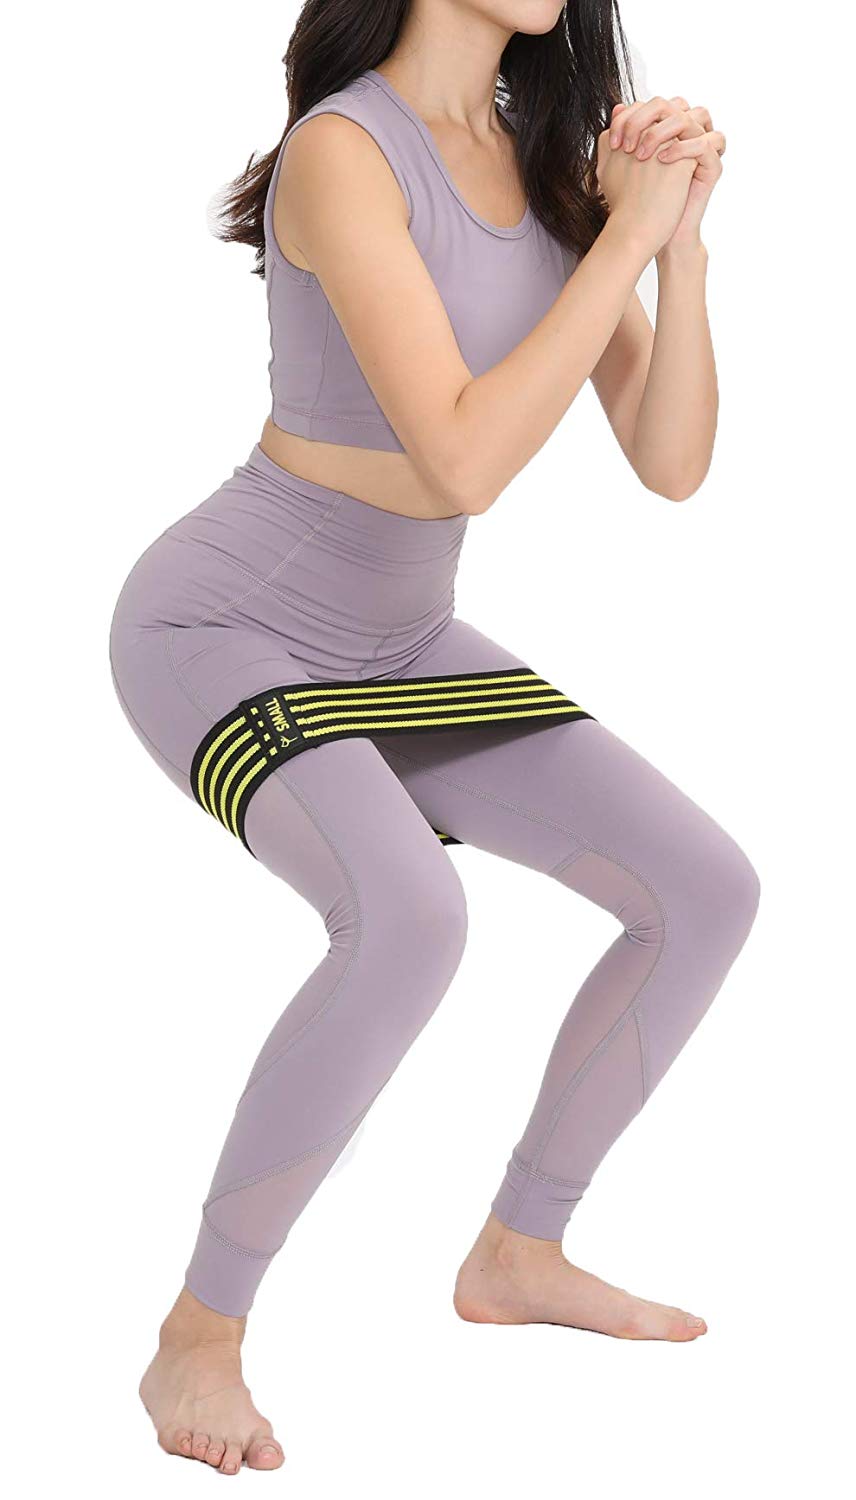 6 Resistance Bands+1 Famous TikTok Leggings for Women,3 Booty Resistance  Bands for Legs and Butt,3 Pull Up Assistance : : Sports & Outdoors